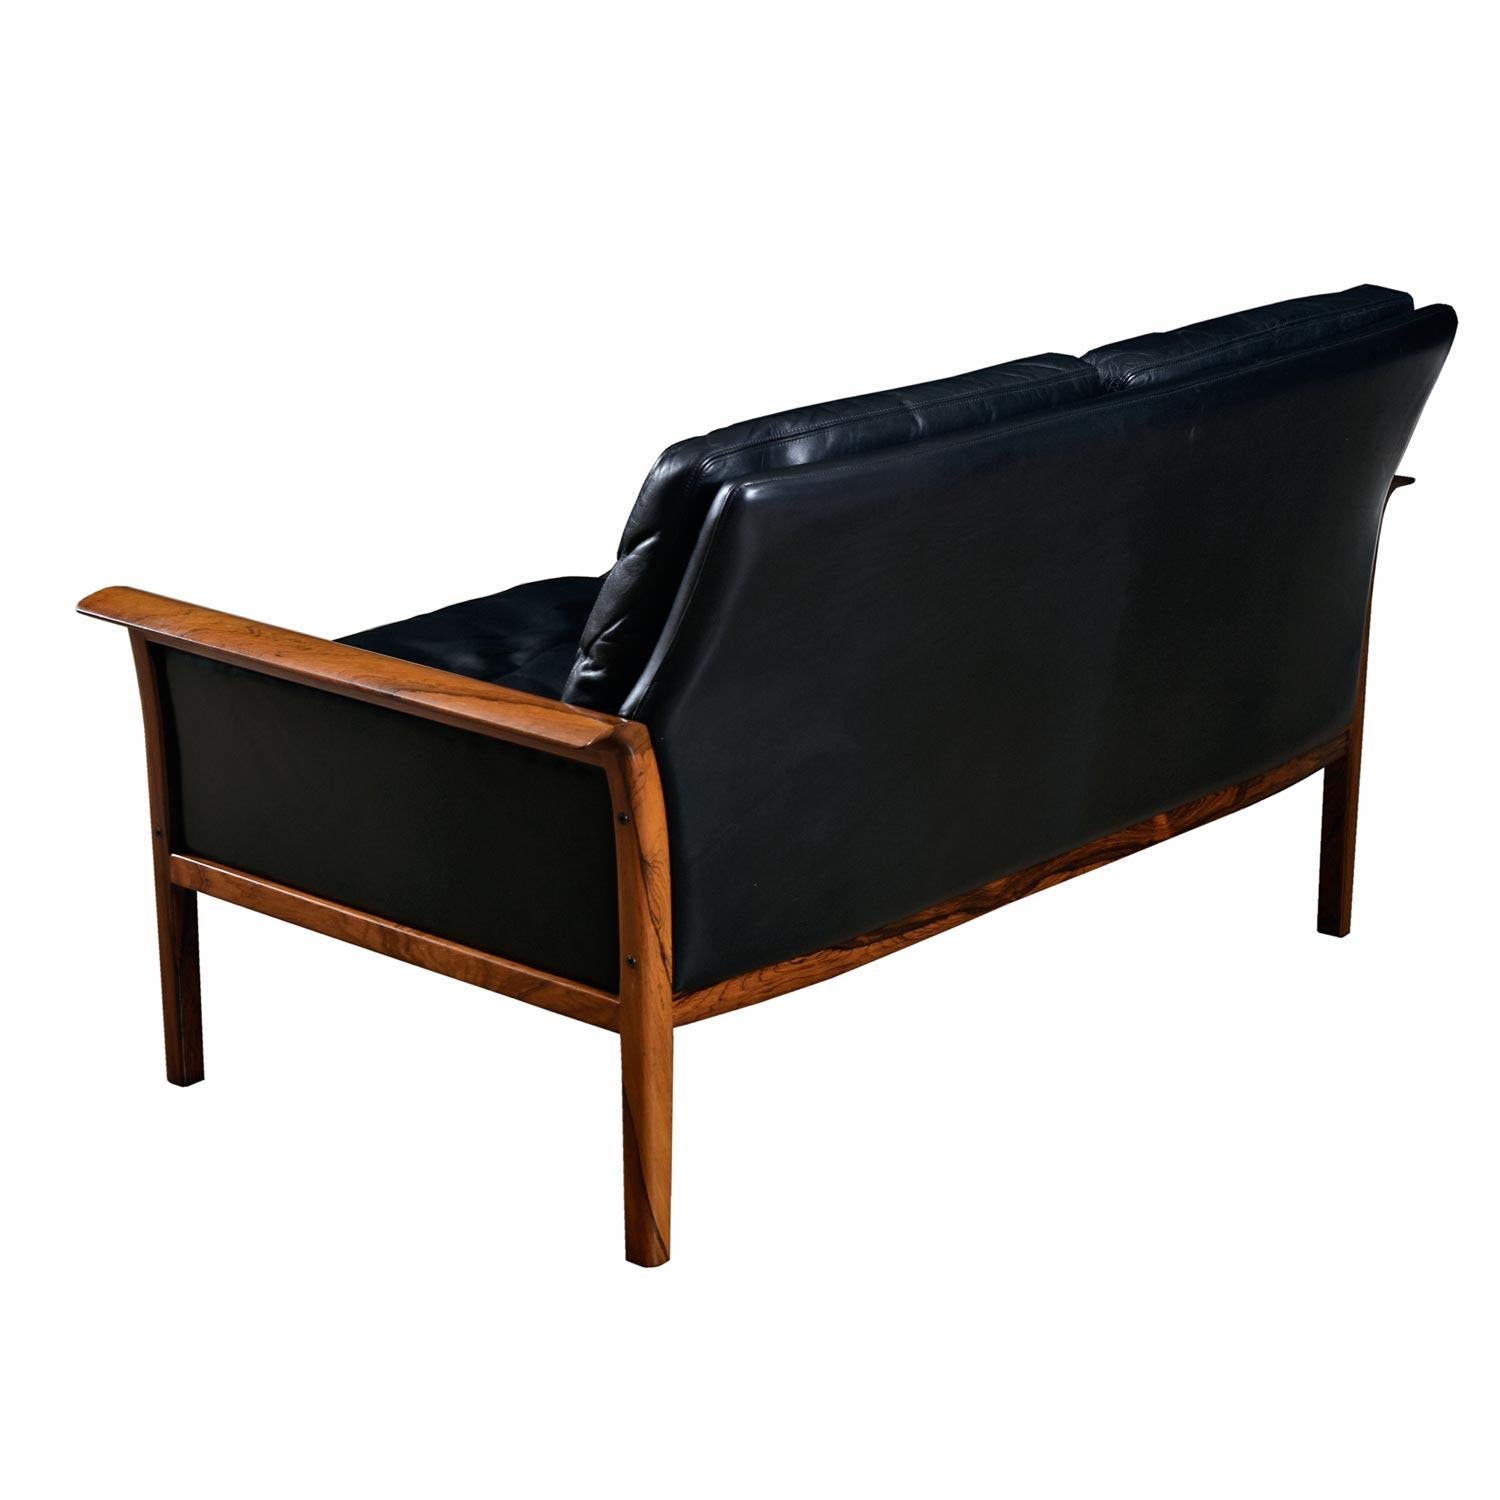 Norwegian Knut Saeter for Vatne Mobler Black Leather and Rosewood Settee Sofa Couch